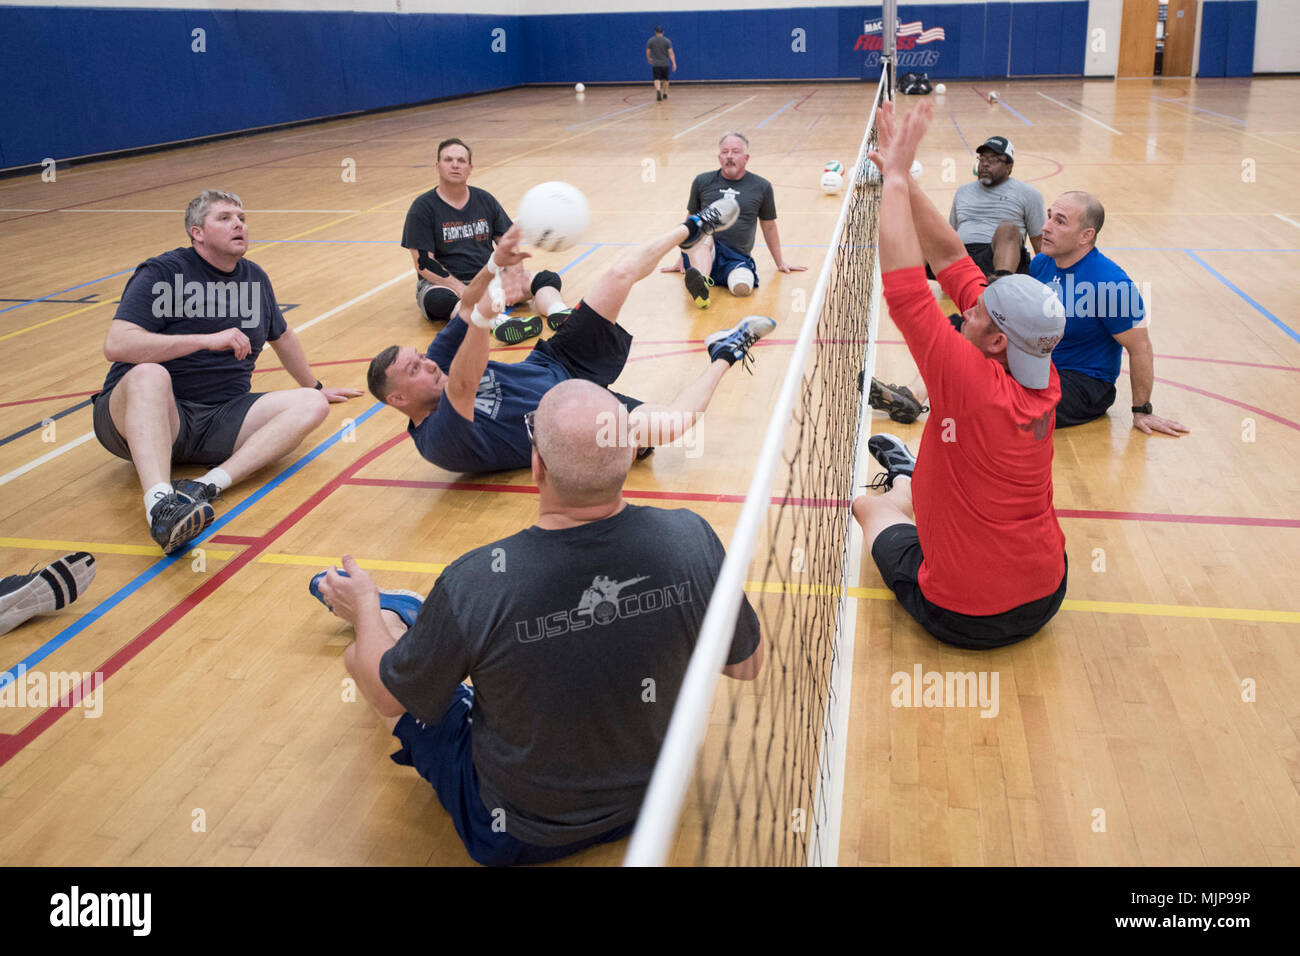 Wounded, ill and injured USSOCOM service members and veterans practice sitting volleyball during training for the 2018 DoD Warrior Games at MacDill Air Force Base in Florida on March 20, 2018.  Participation in USSOCOM Warrior Care Program military adaptive sport events throughout the year enhances SOF athletes' mental and physical rehabilitation, aiding in their reintegration or transition.    (DoD Armed Forces and civilians displaying courage bravery dedication commitment and sacrifice Stock Photo